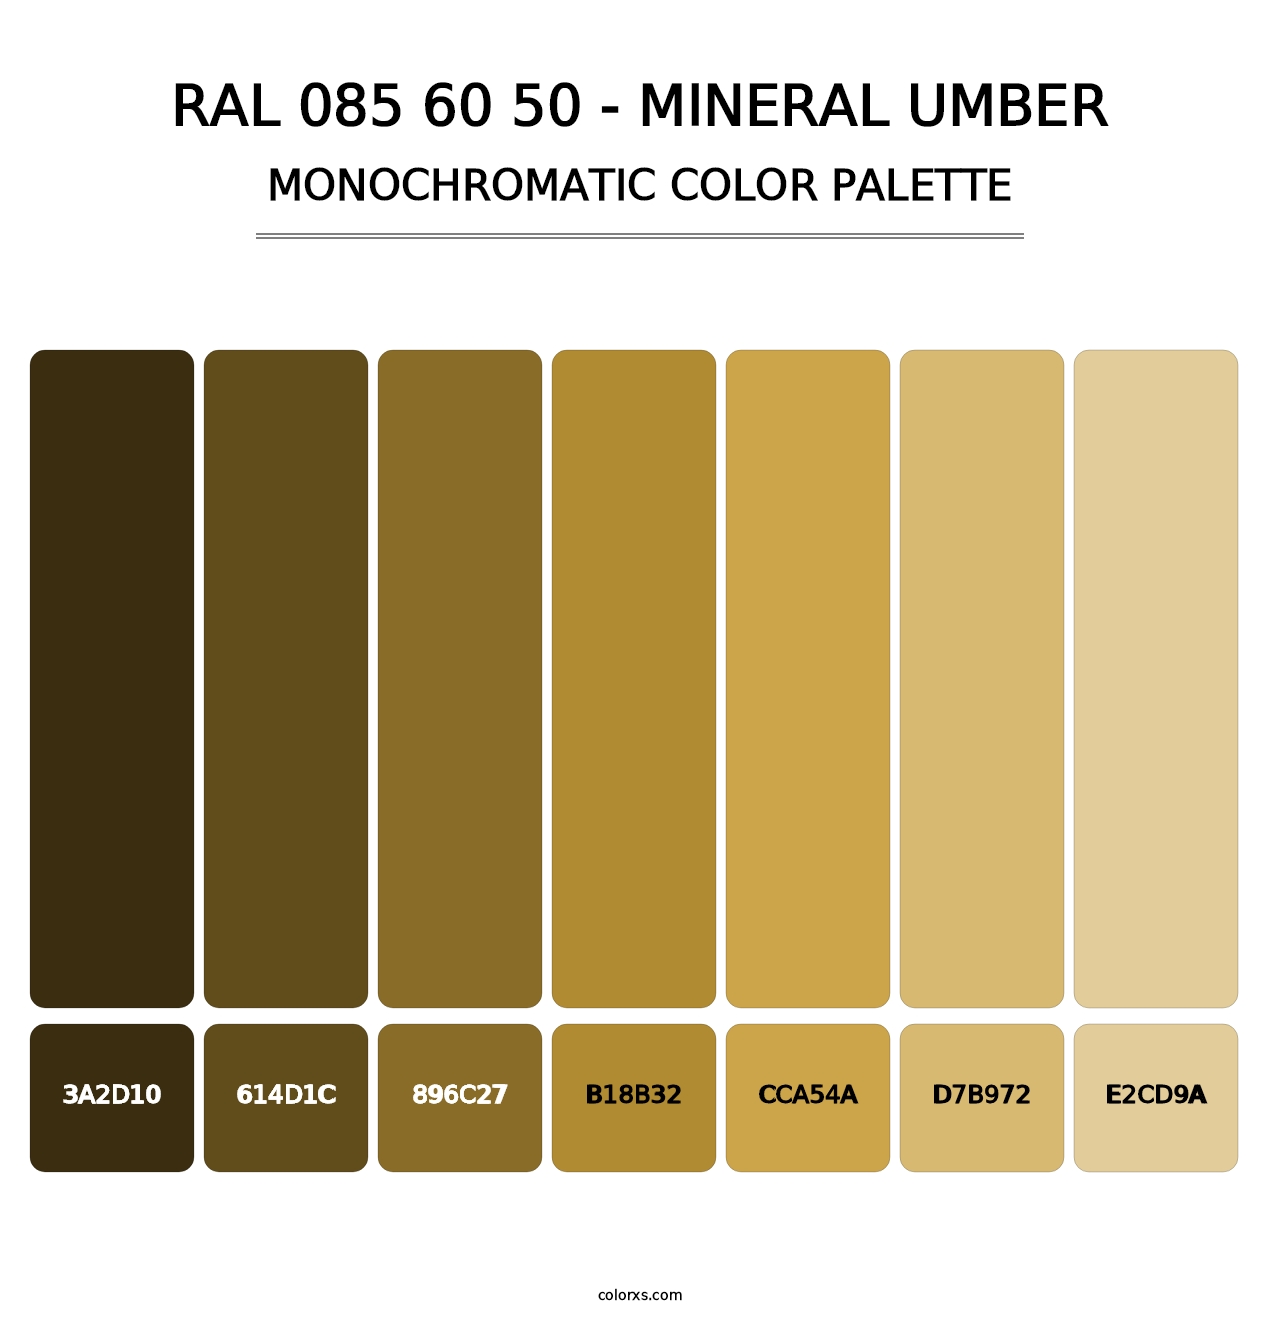 RAL 085 60 50 - Mineral Umber - Monochromatic Color Palette